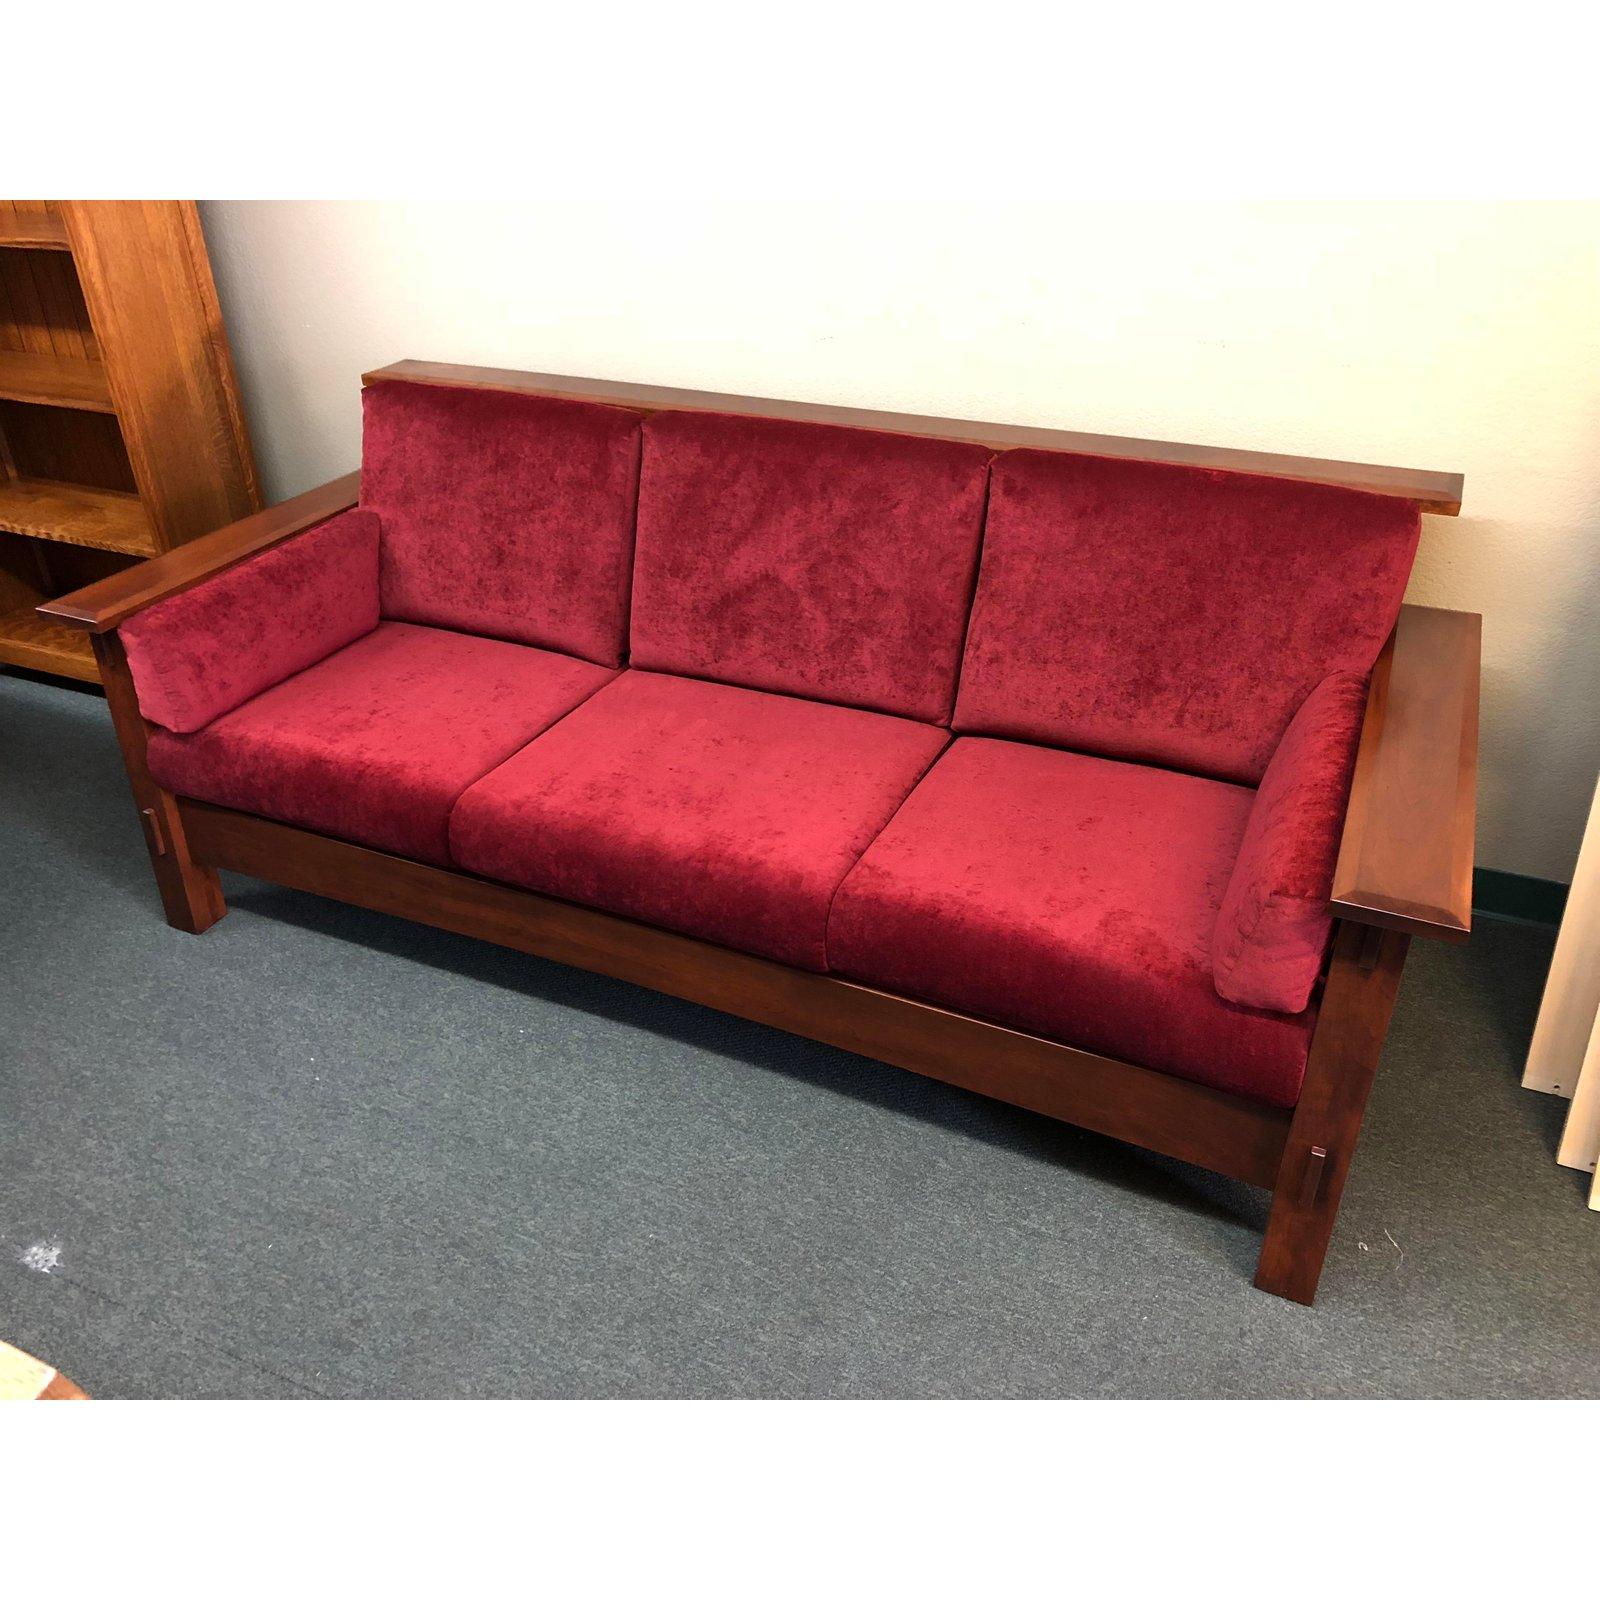 A McCoy sofa by Aj' sFurniture. Straight from a Designer Showroom. Aj's Furniture was founded by Alvin Jr and his wife Inez in 2000. Today, family oriented business has grown to encompass a full line of the home furnishings. The frame is a quarter